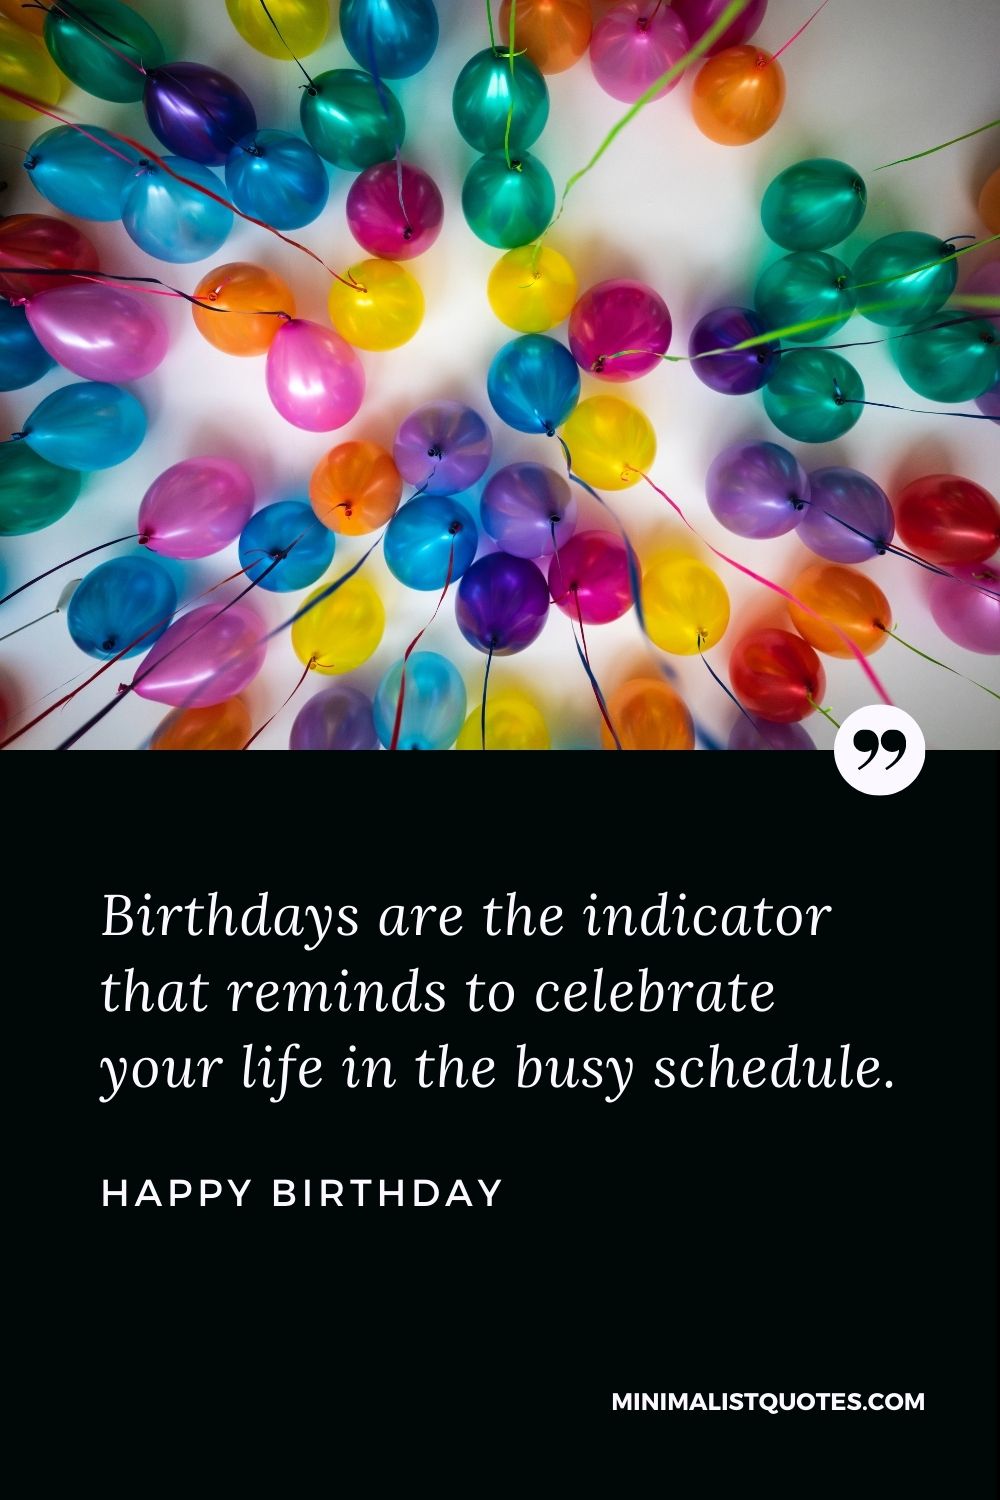 Happy Birthday Wishes - Birthdays are the indicator that reminds to celebrate your life in the busy schedule.